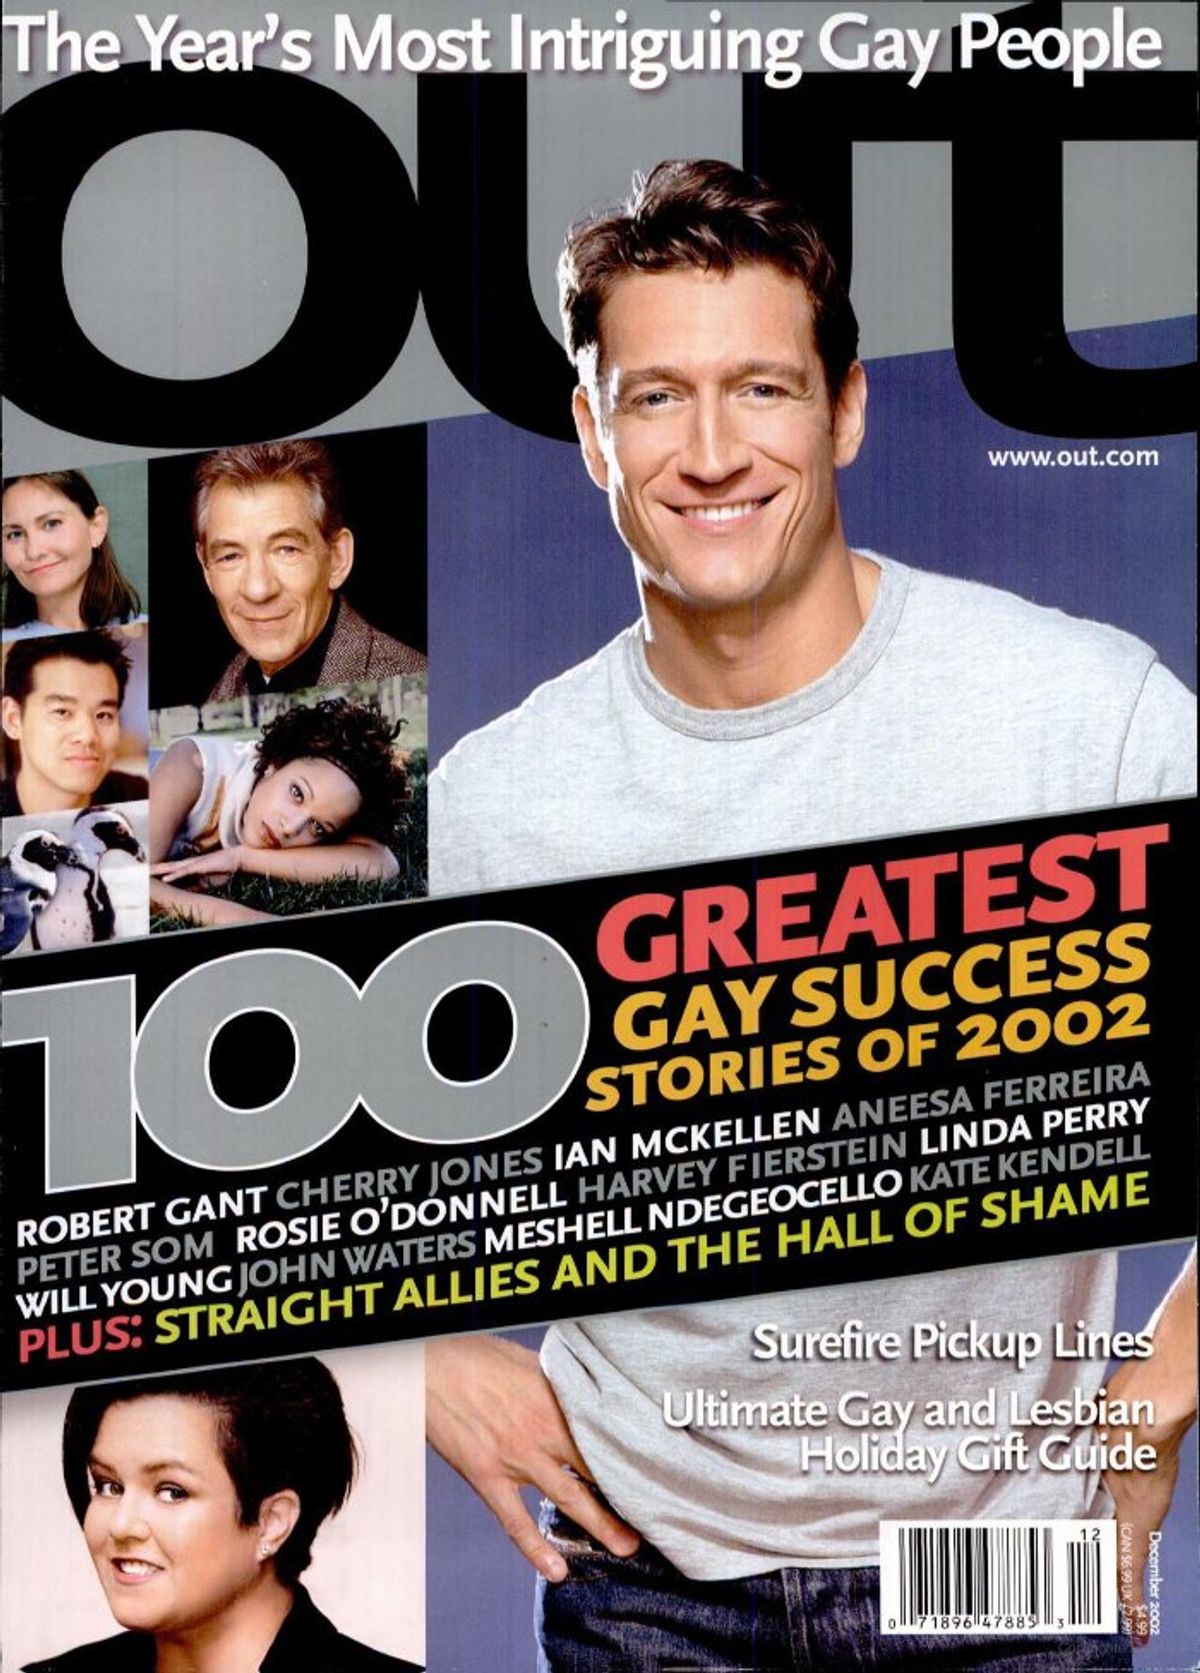 
Robert Gant, Rosie O'Donnell & more ushered in an era of gay success in 2002
